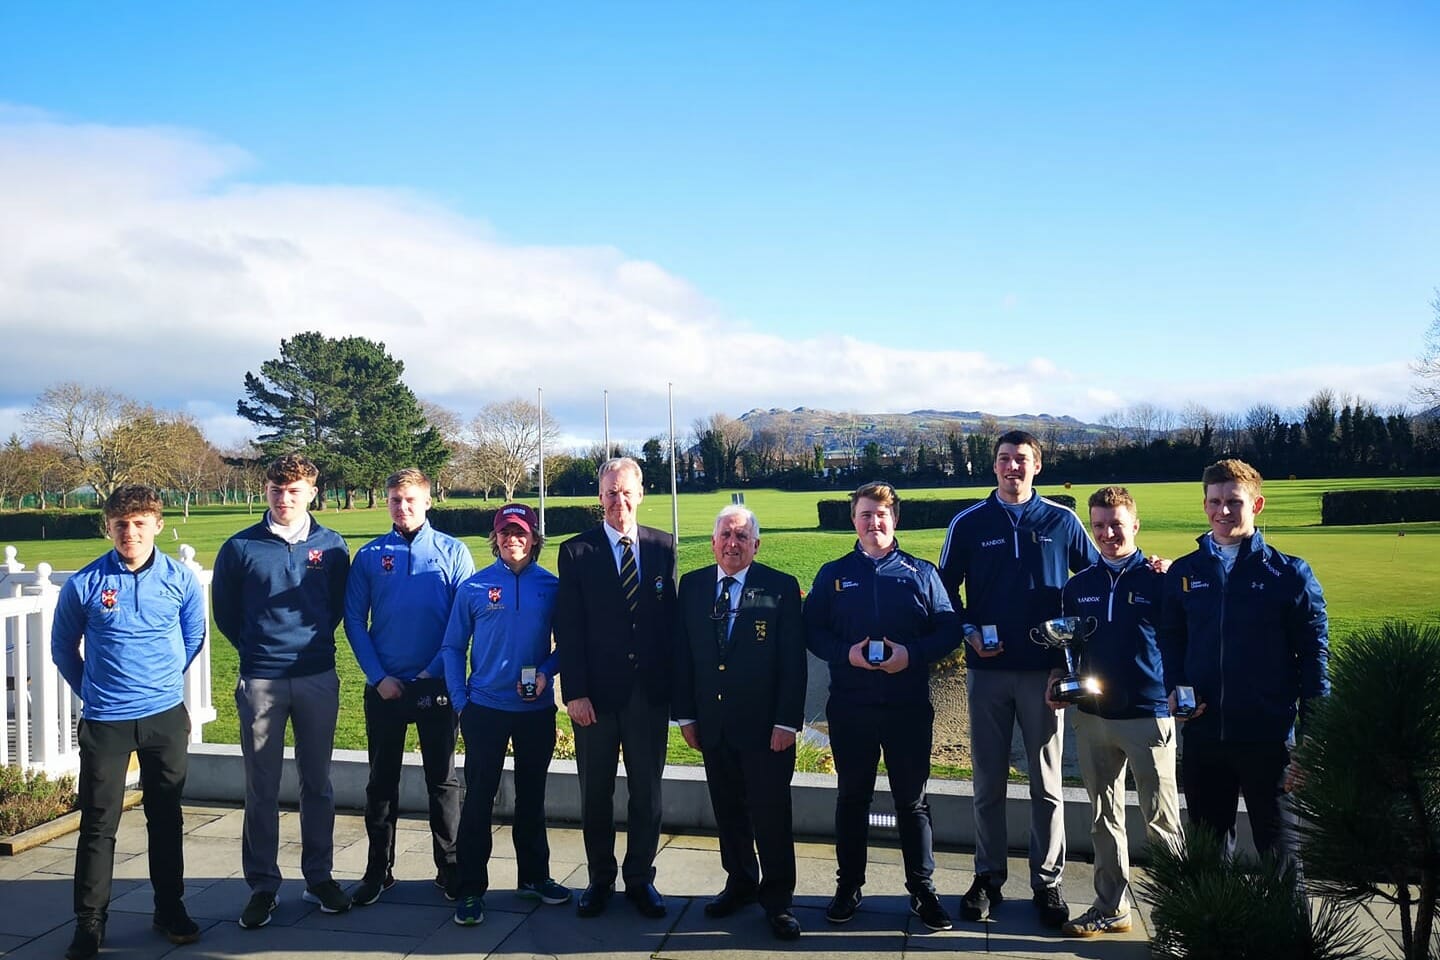 Ulster University crowned Irish Colleges Match Play champs